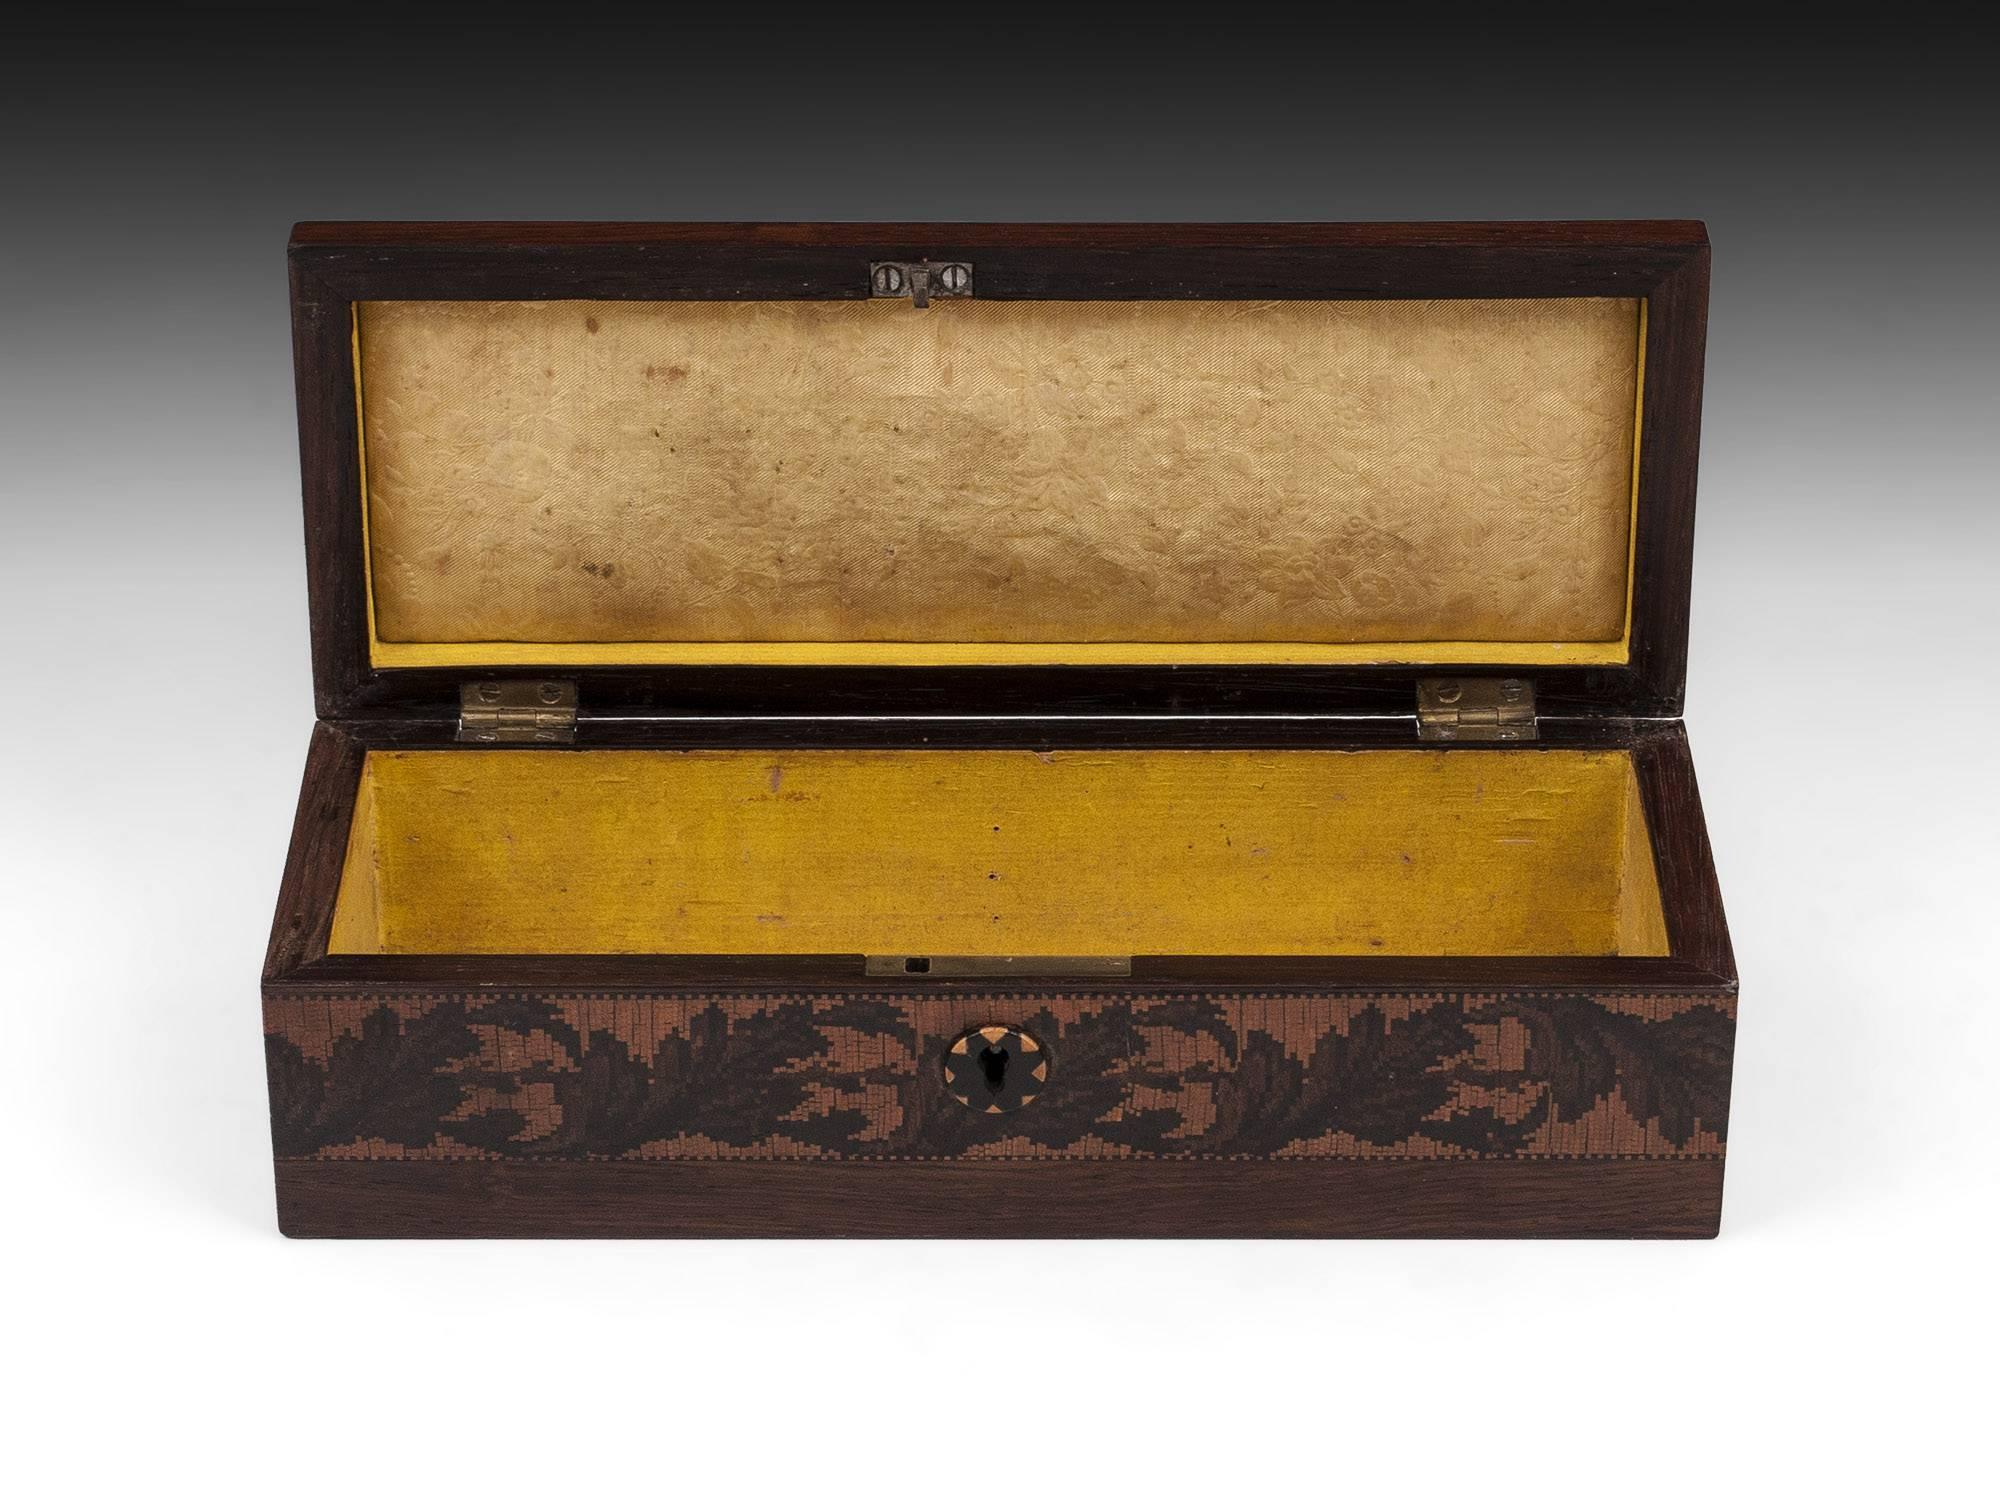 Tunbridge Ware Antique Glove Box with Floral Band, 19th Century In Good Condition In Northampton, United Kingdom